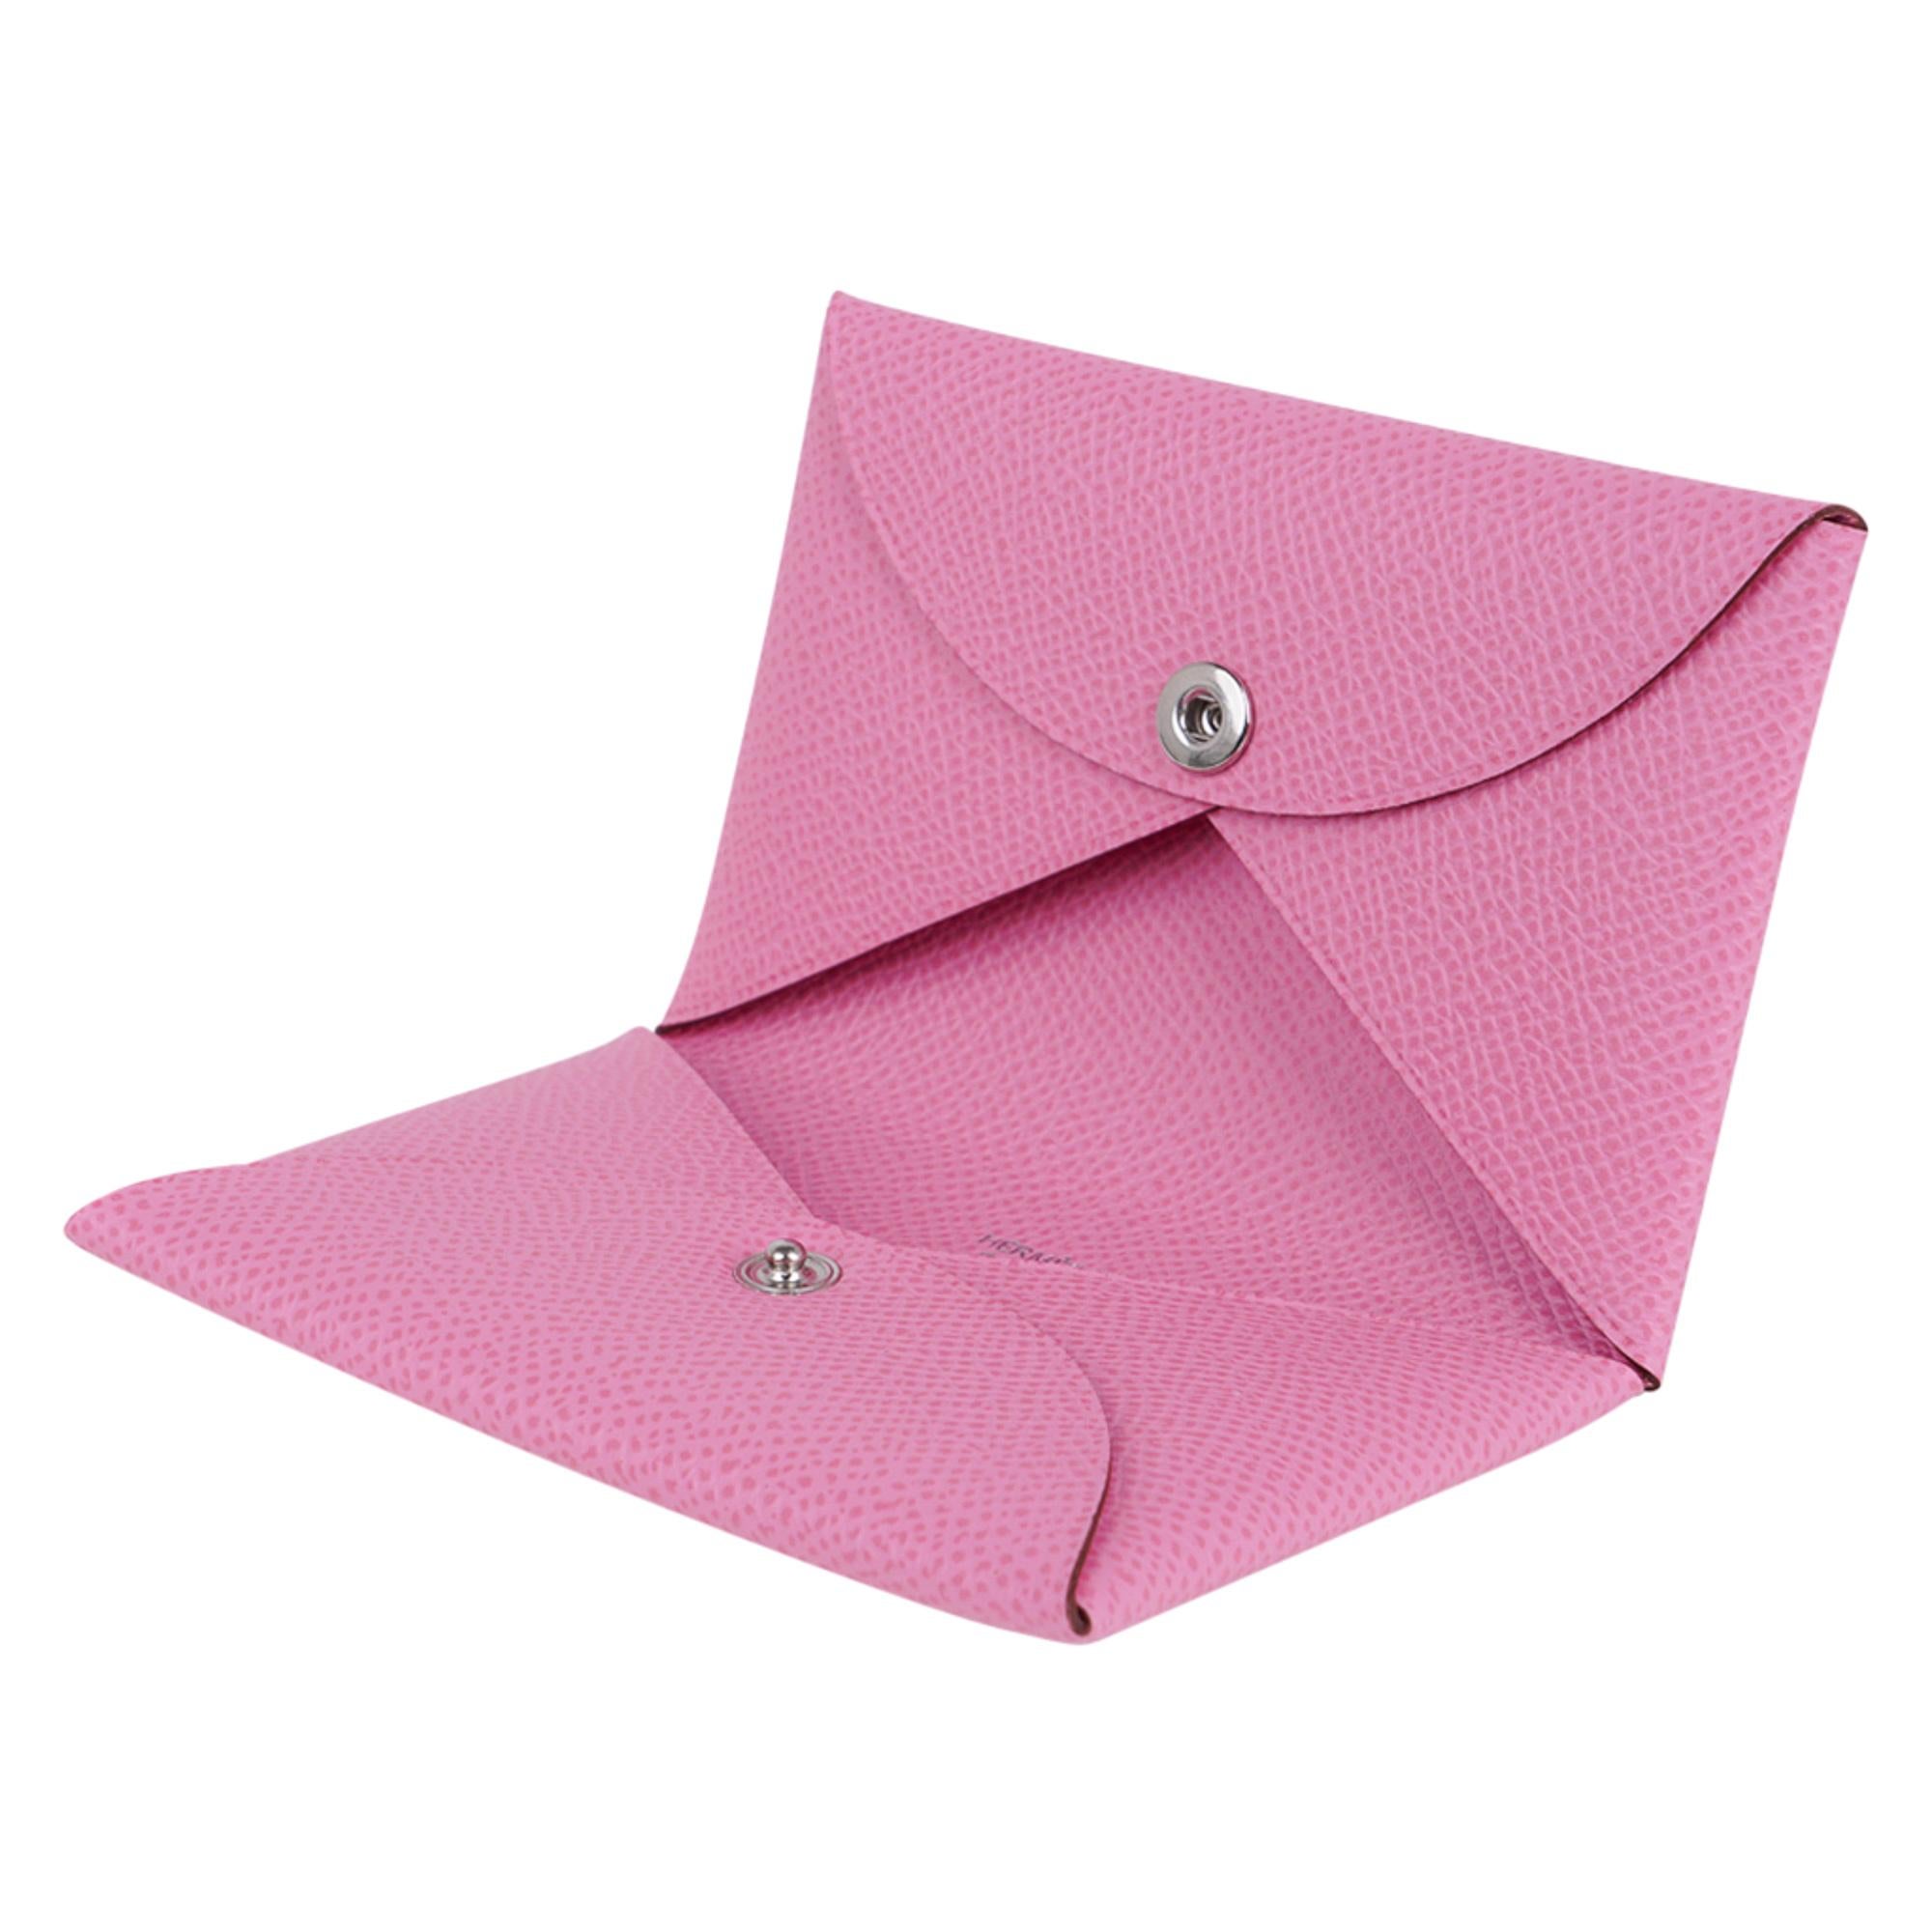 Guaranteed authentic Hermes Calvi card holder featured in coveted 5P Pink.
Epsom leather with Palladium snap closure.
The card holder has 2 slots for business/credit cards.
Comes with signature Hermes box.
New or Store Fresh Condition. 
final